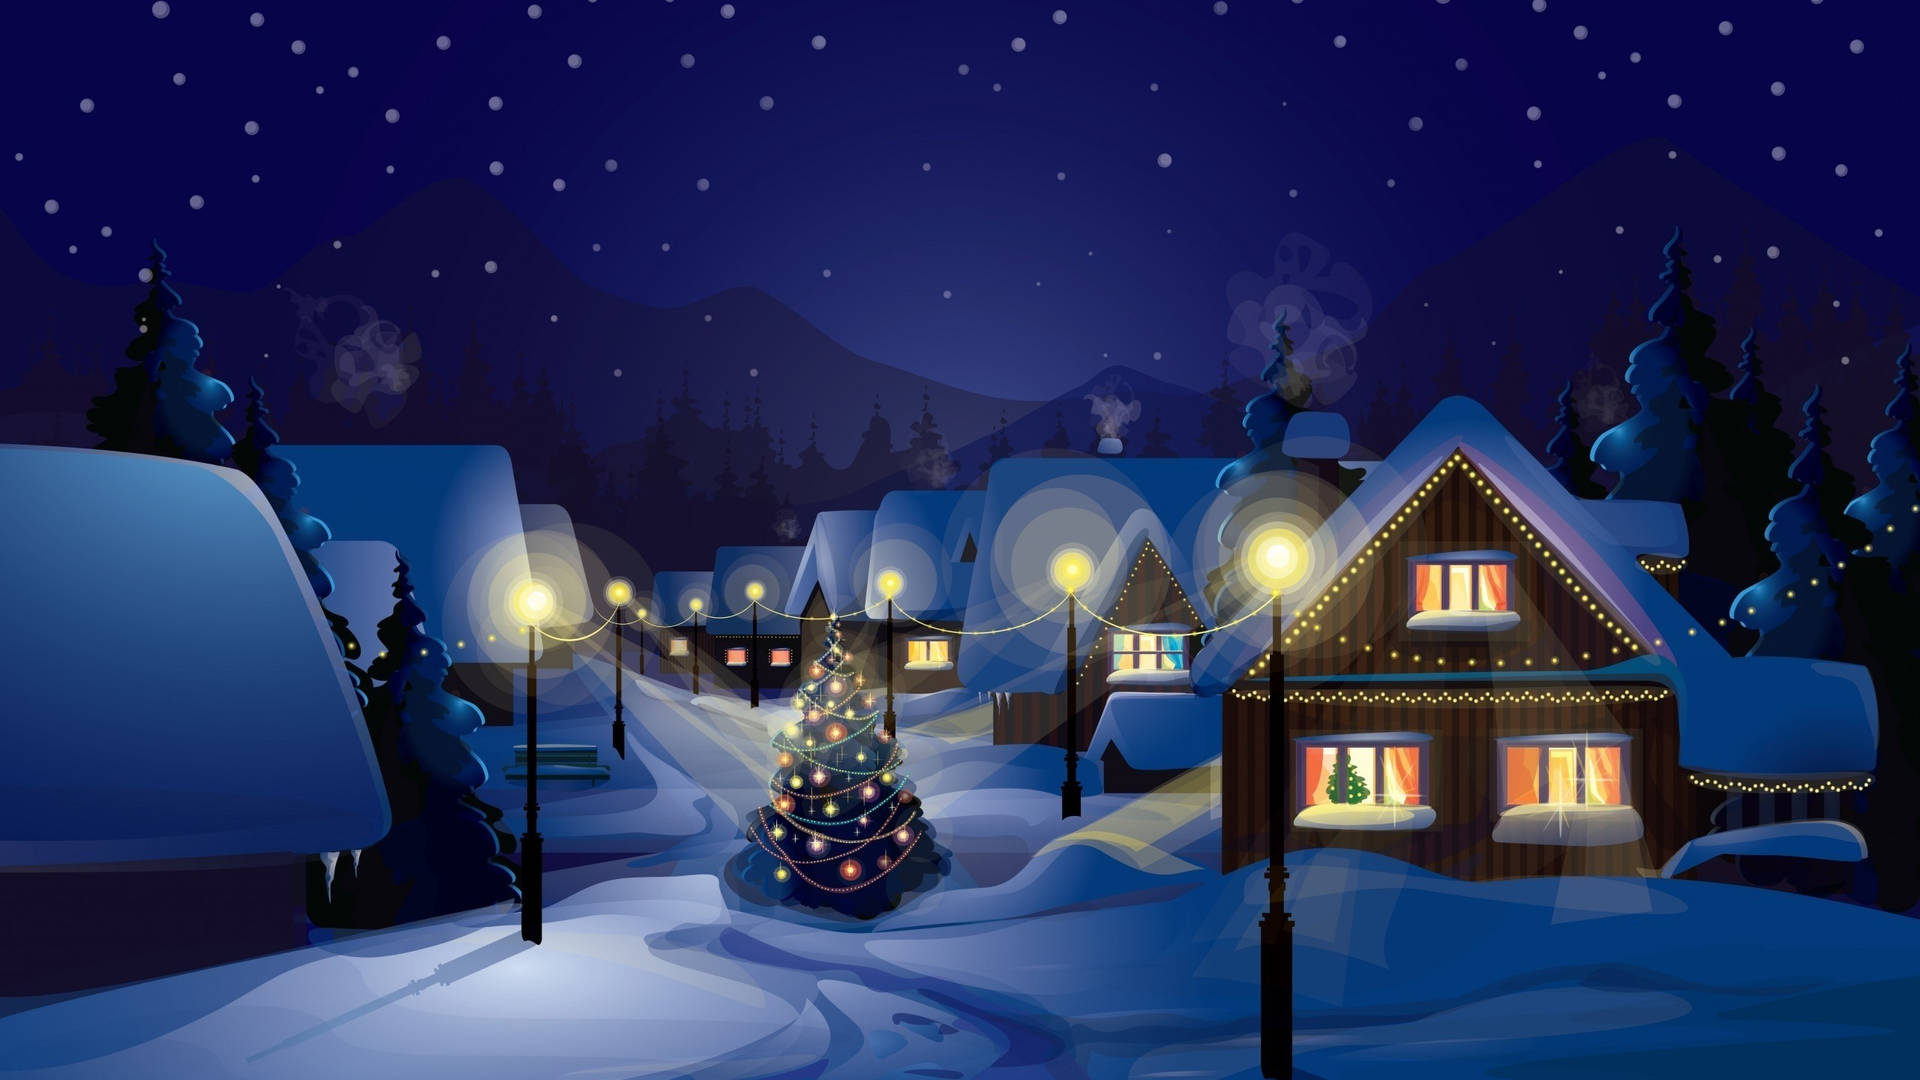 Christmas Village At Night With Christmas Tree And Lights Wallpaper